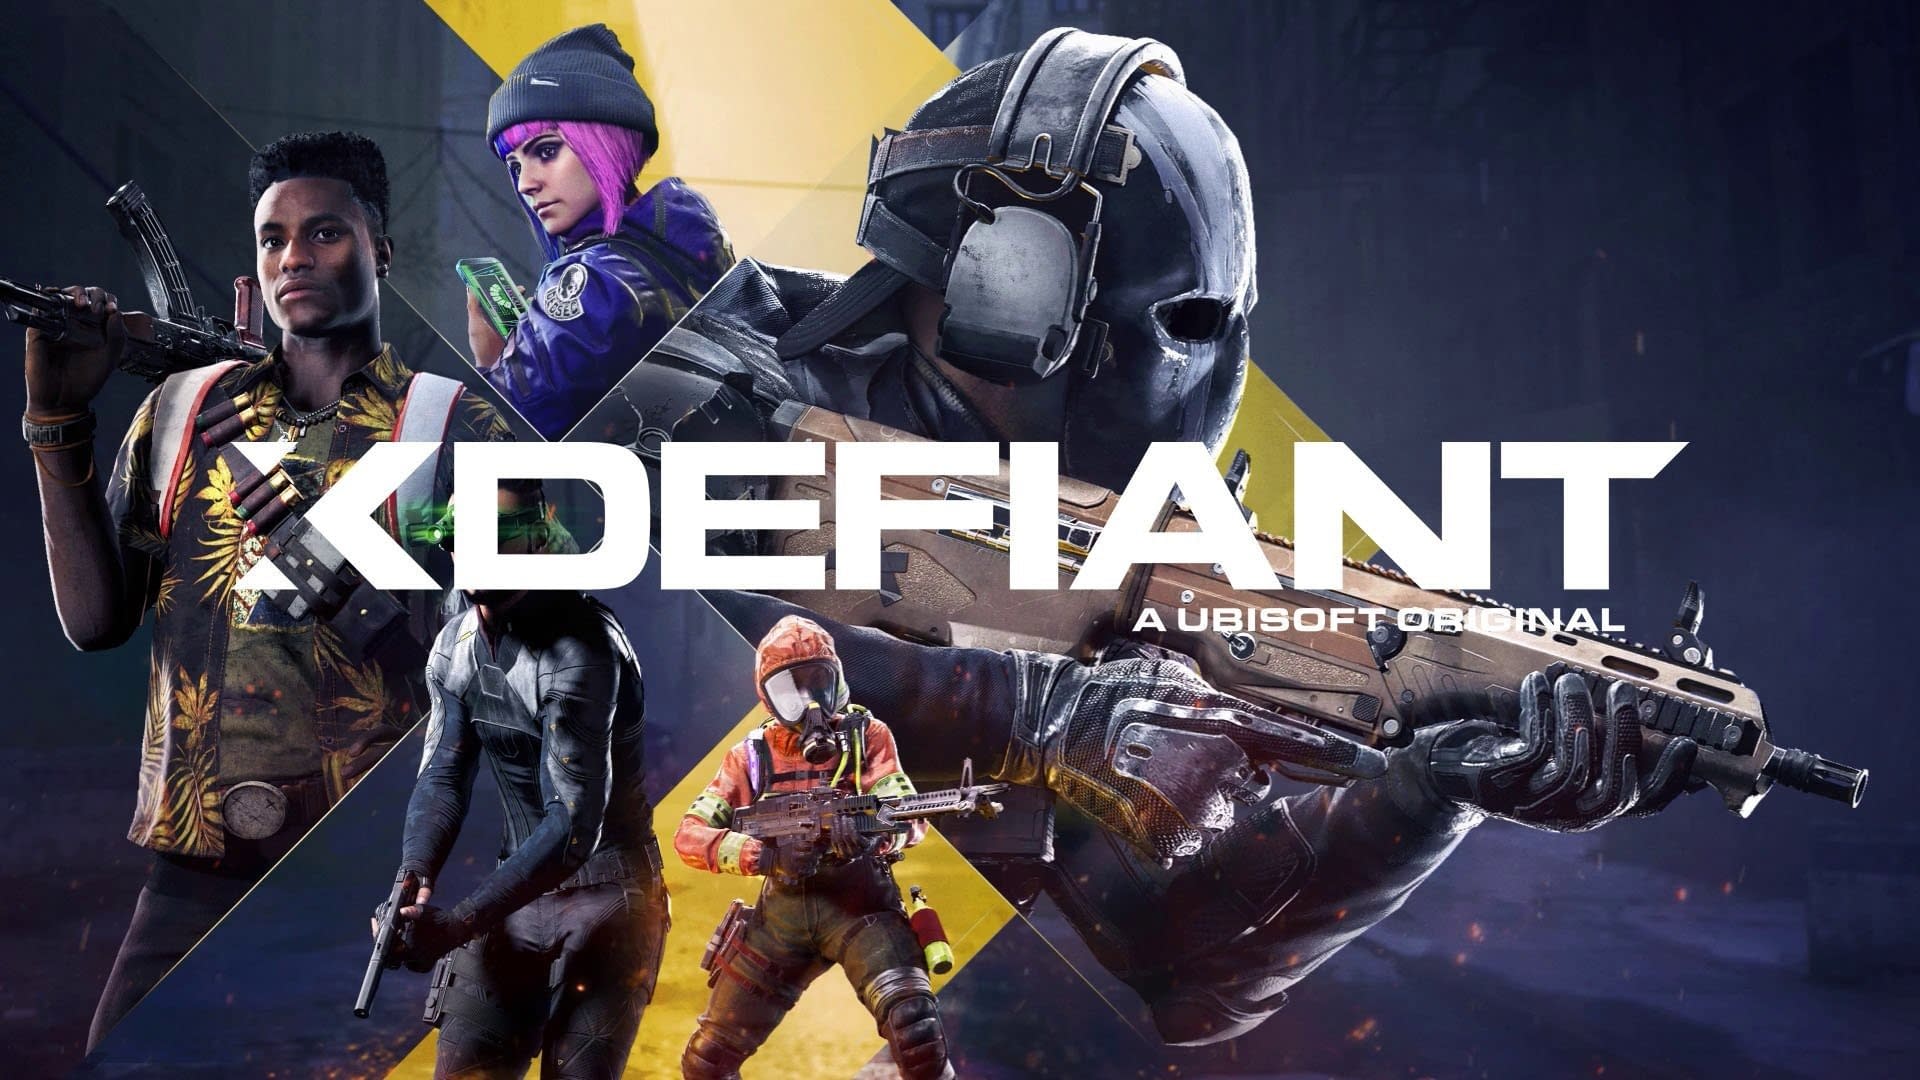 Ubisoft released new trailers for free shooter game Xdefiant